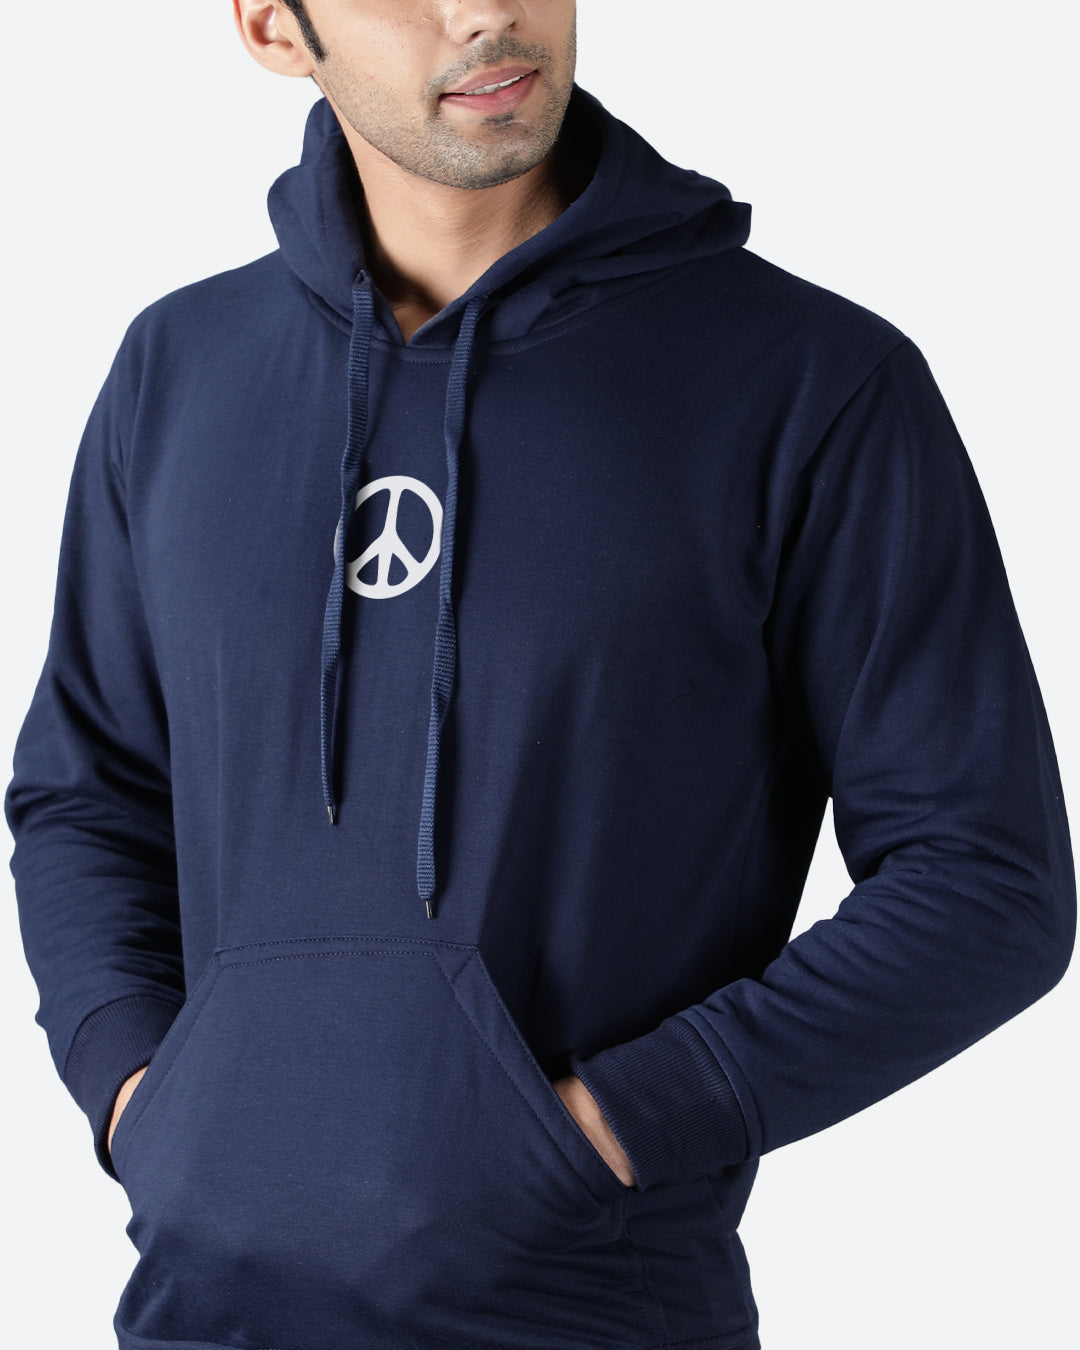 Protect Your Peace Men's Hoodie